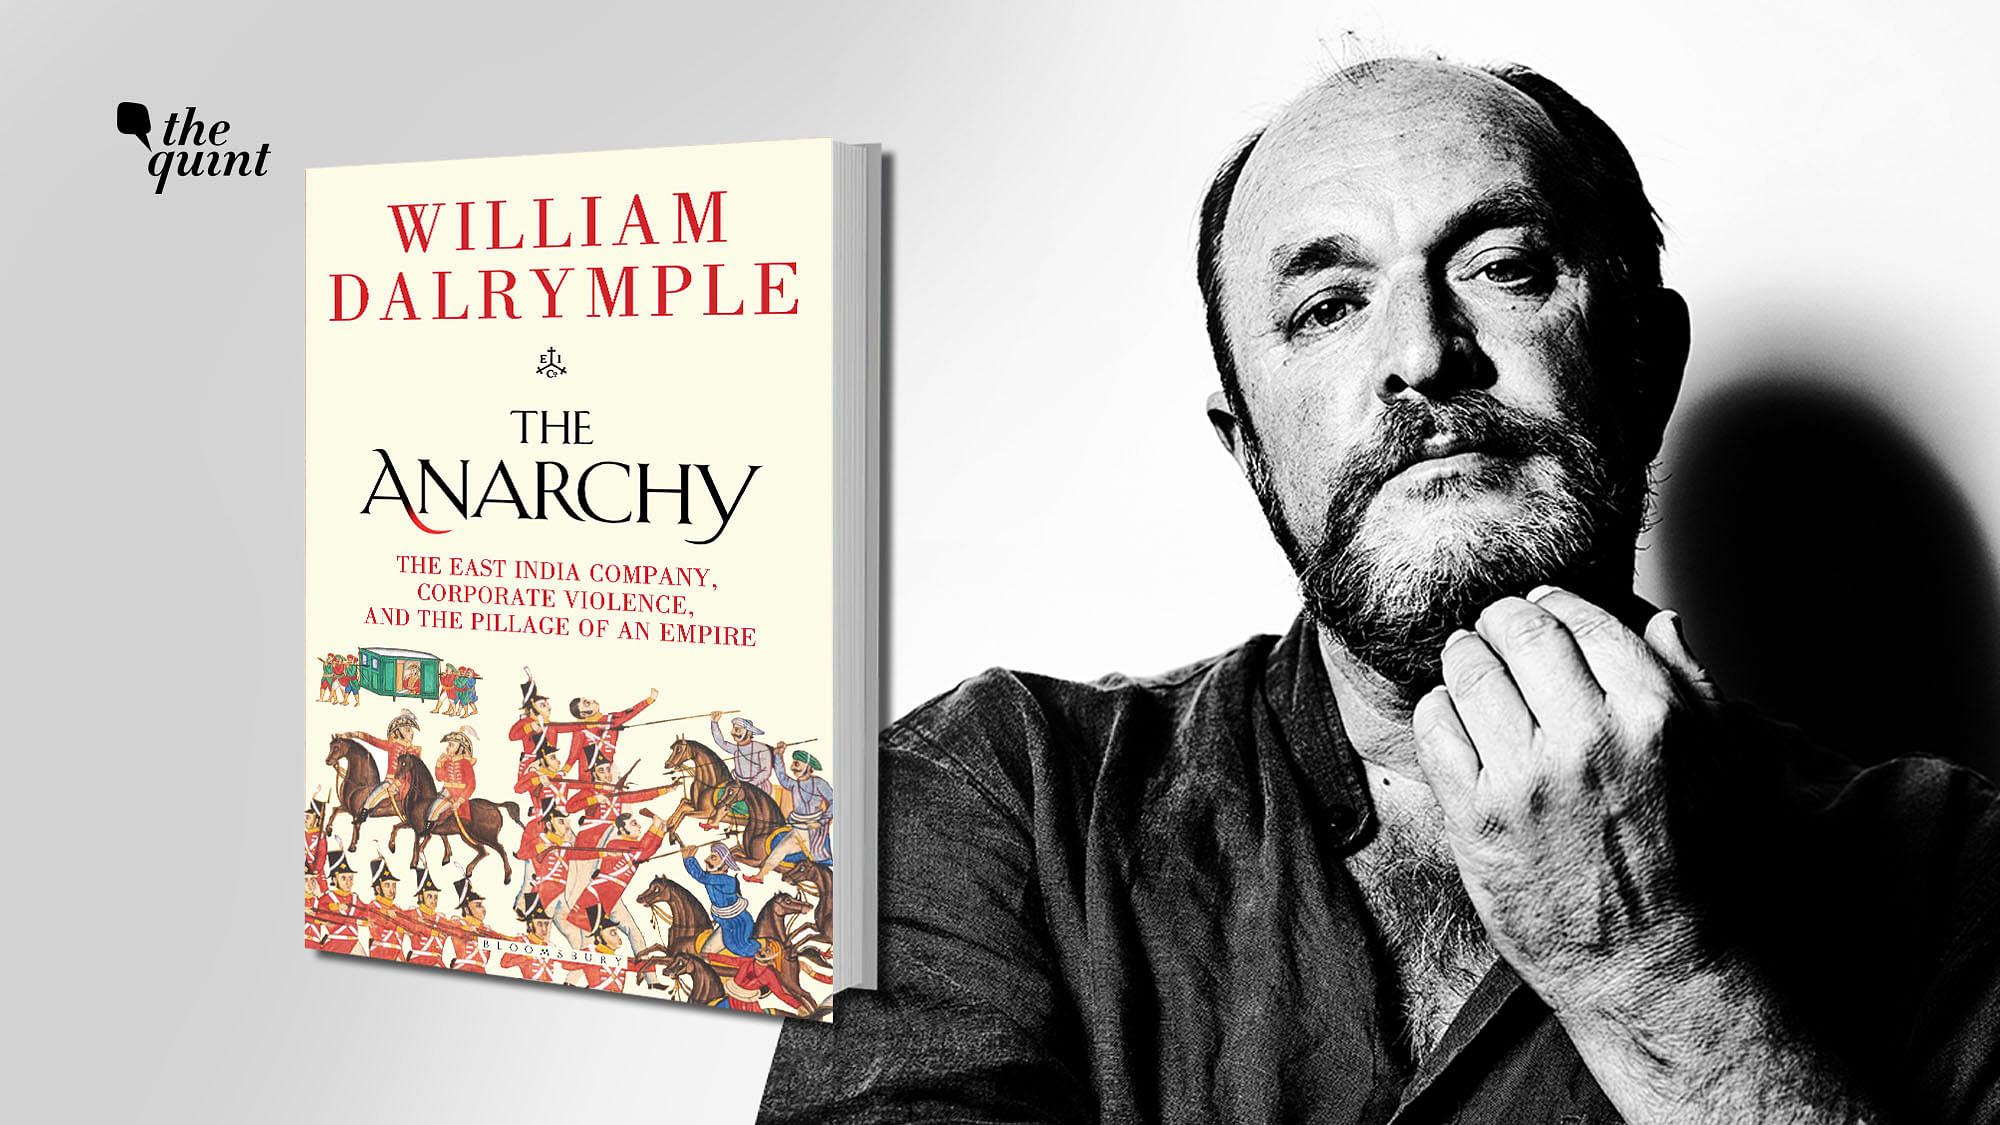 Image of historian William Dalrymple and his latest book ‘The Anarchy’ used for representational purposes.